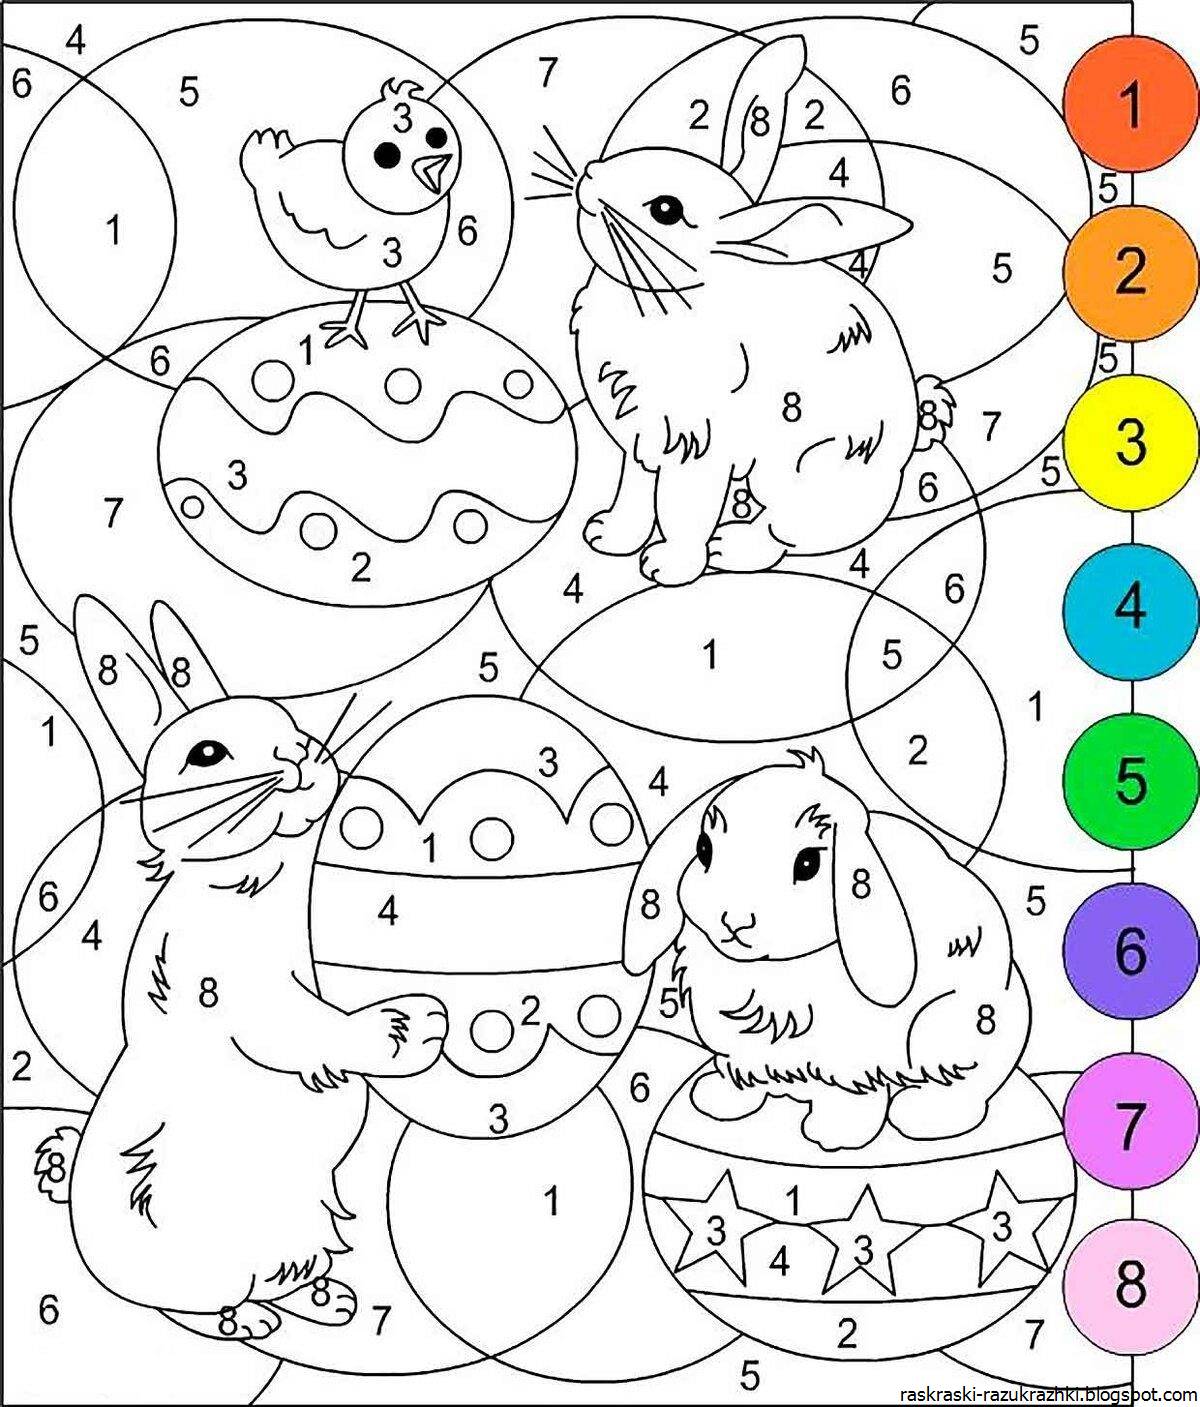 Colour cascade coloring picture by numbers